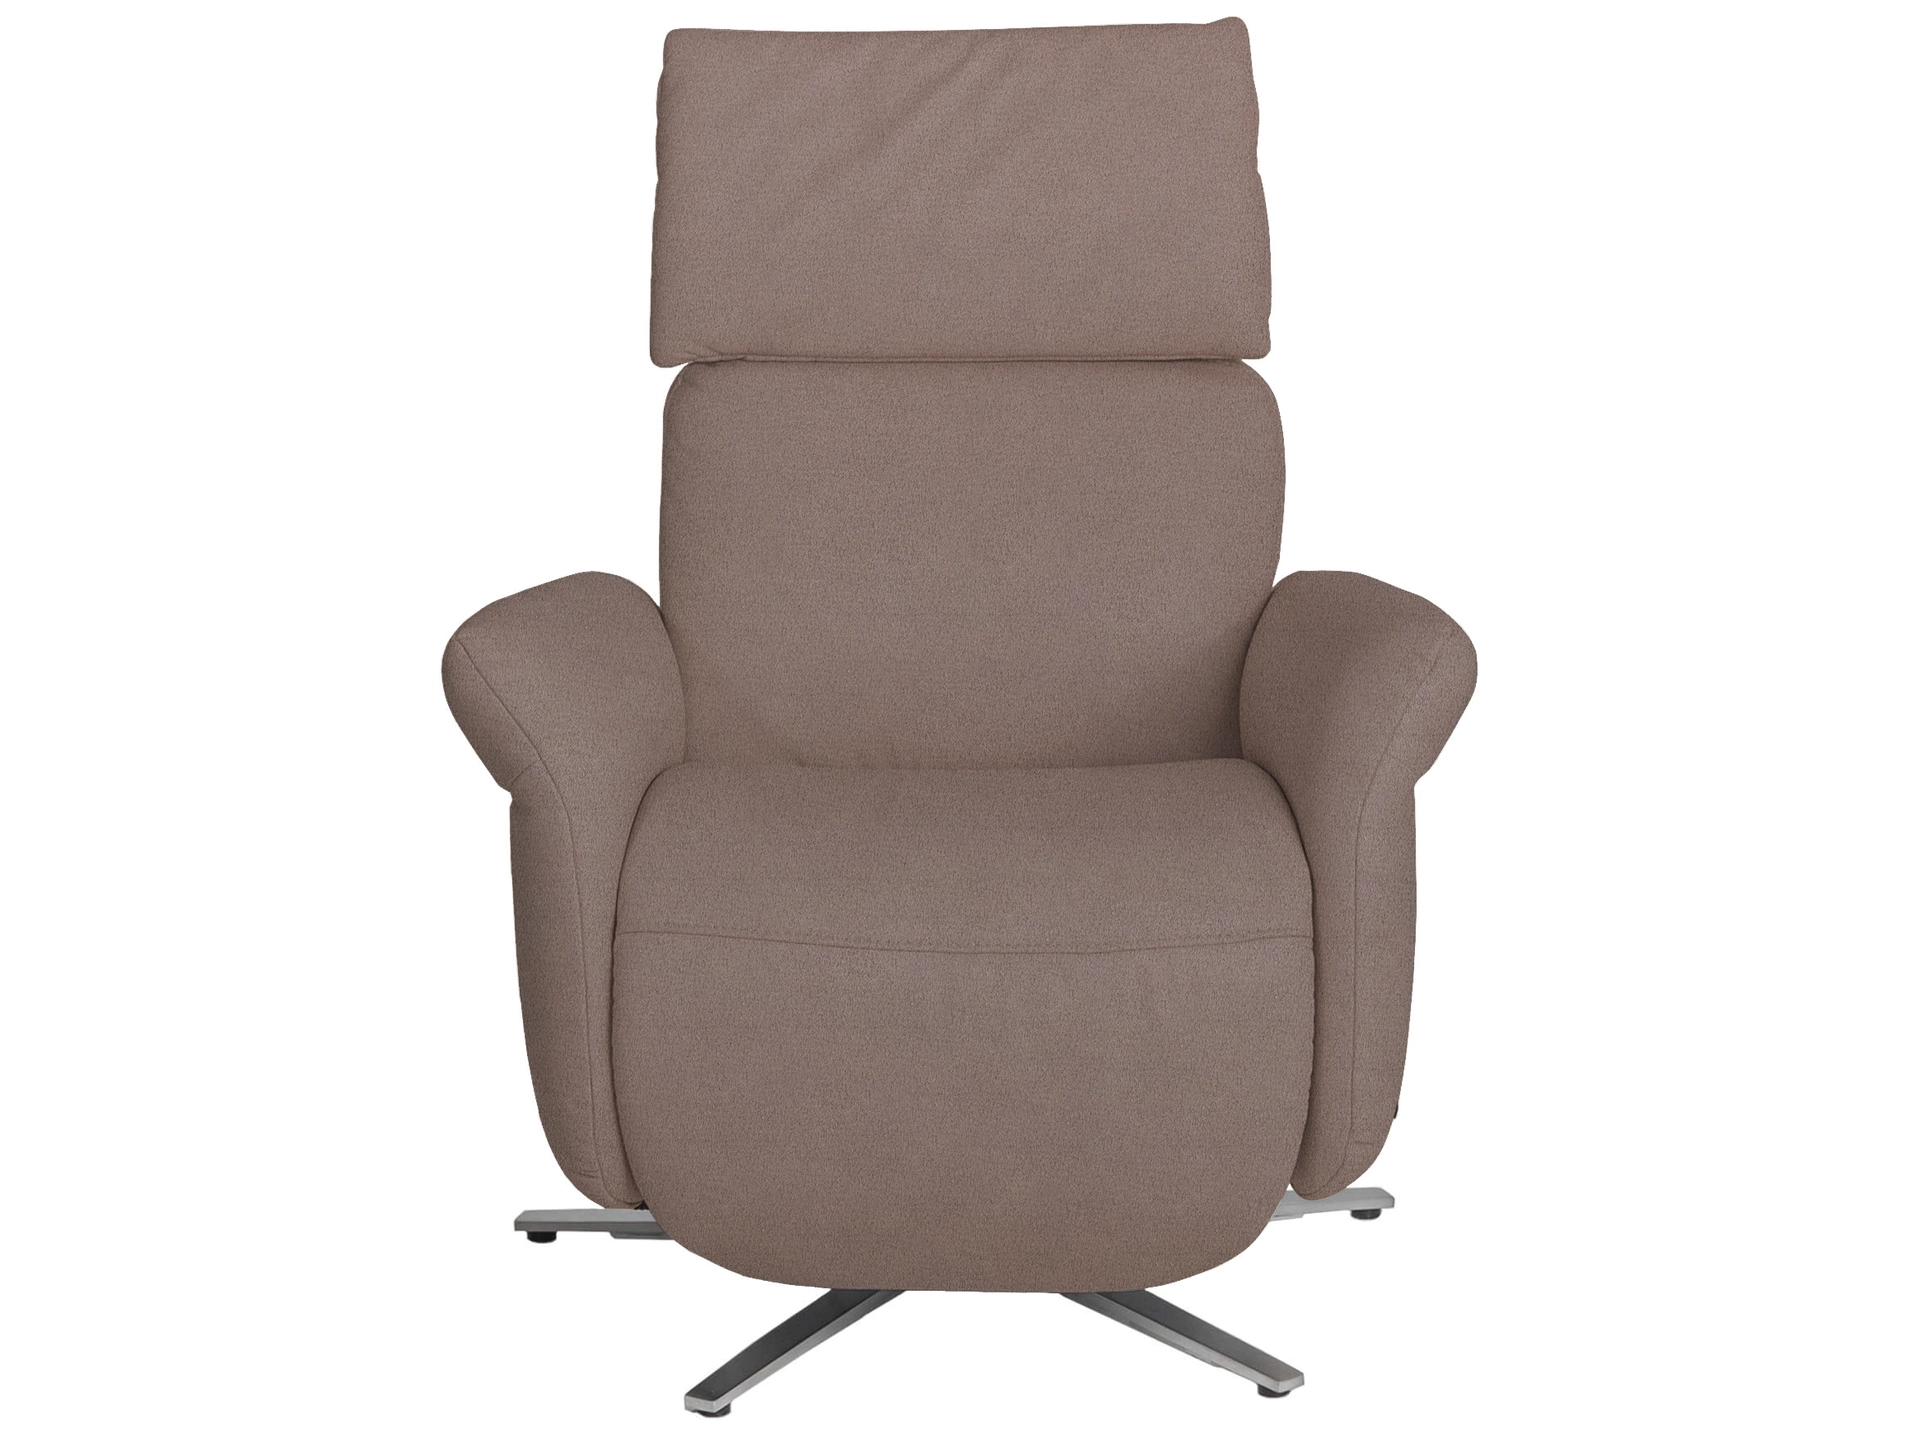 Relaxer Balea Basic Himolla/ Farbe: Schiefer / Material: Stoff Basic / Masse (BxT) :77x84 cm